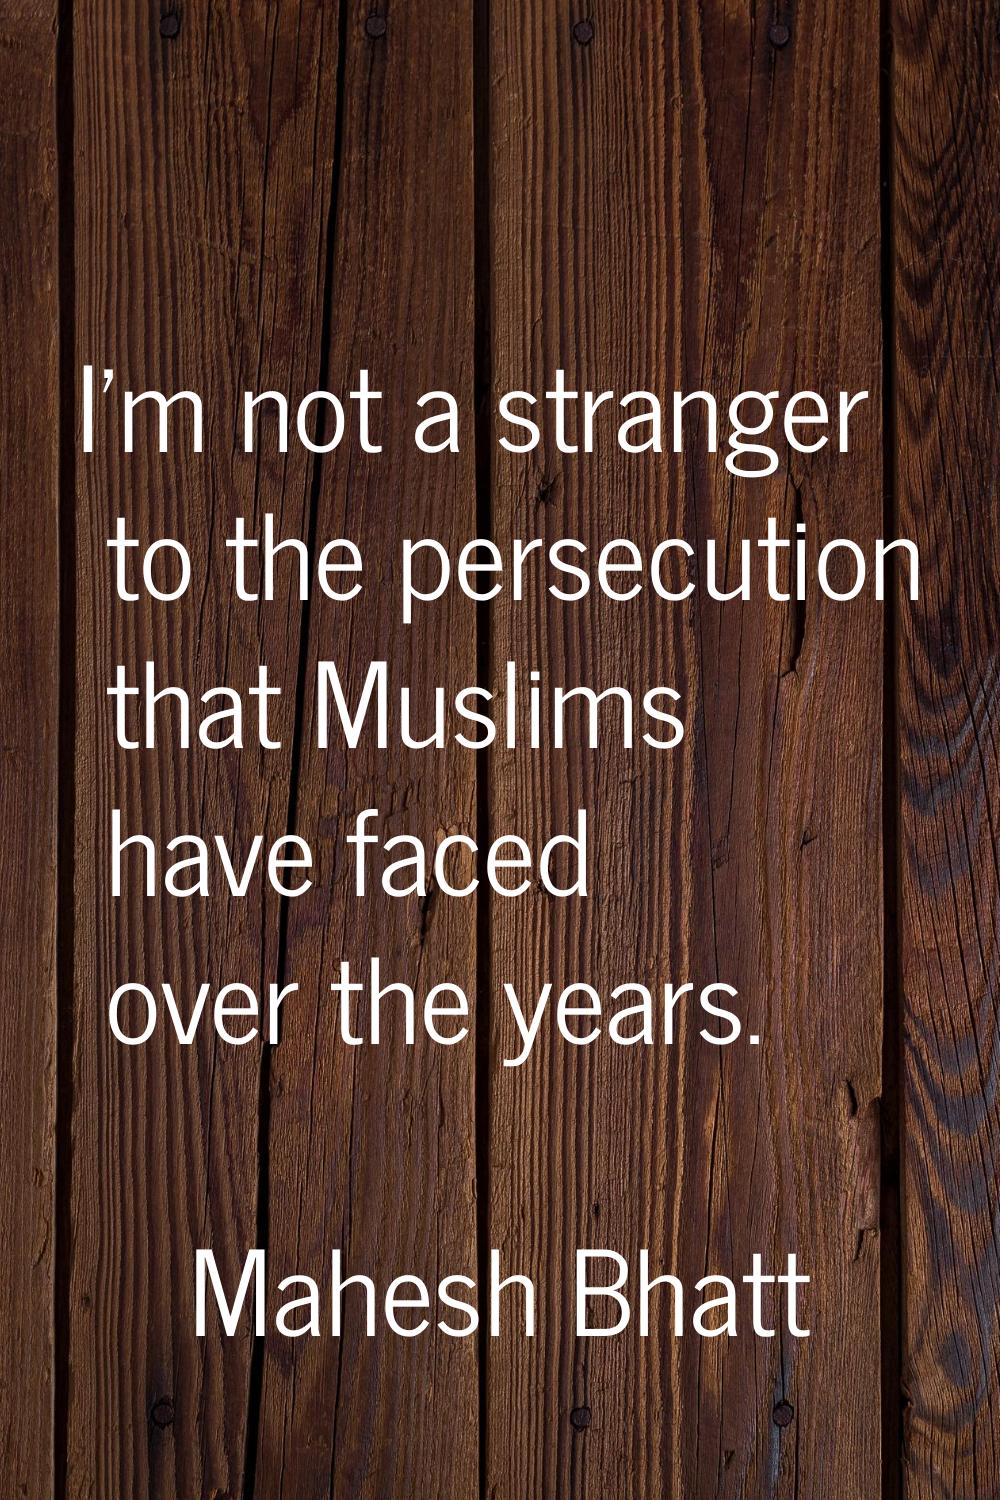 I'm not a stranger to the persecution that Muslims have faced over the years.